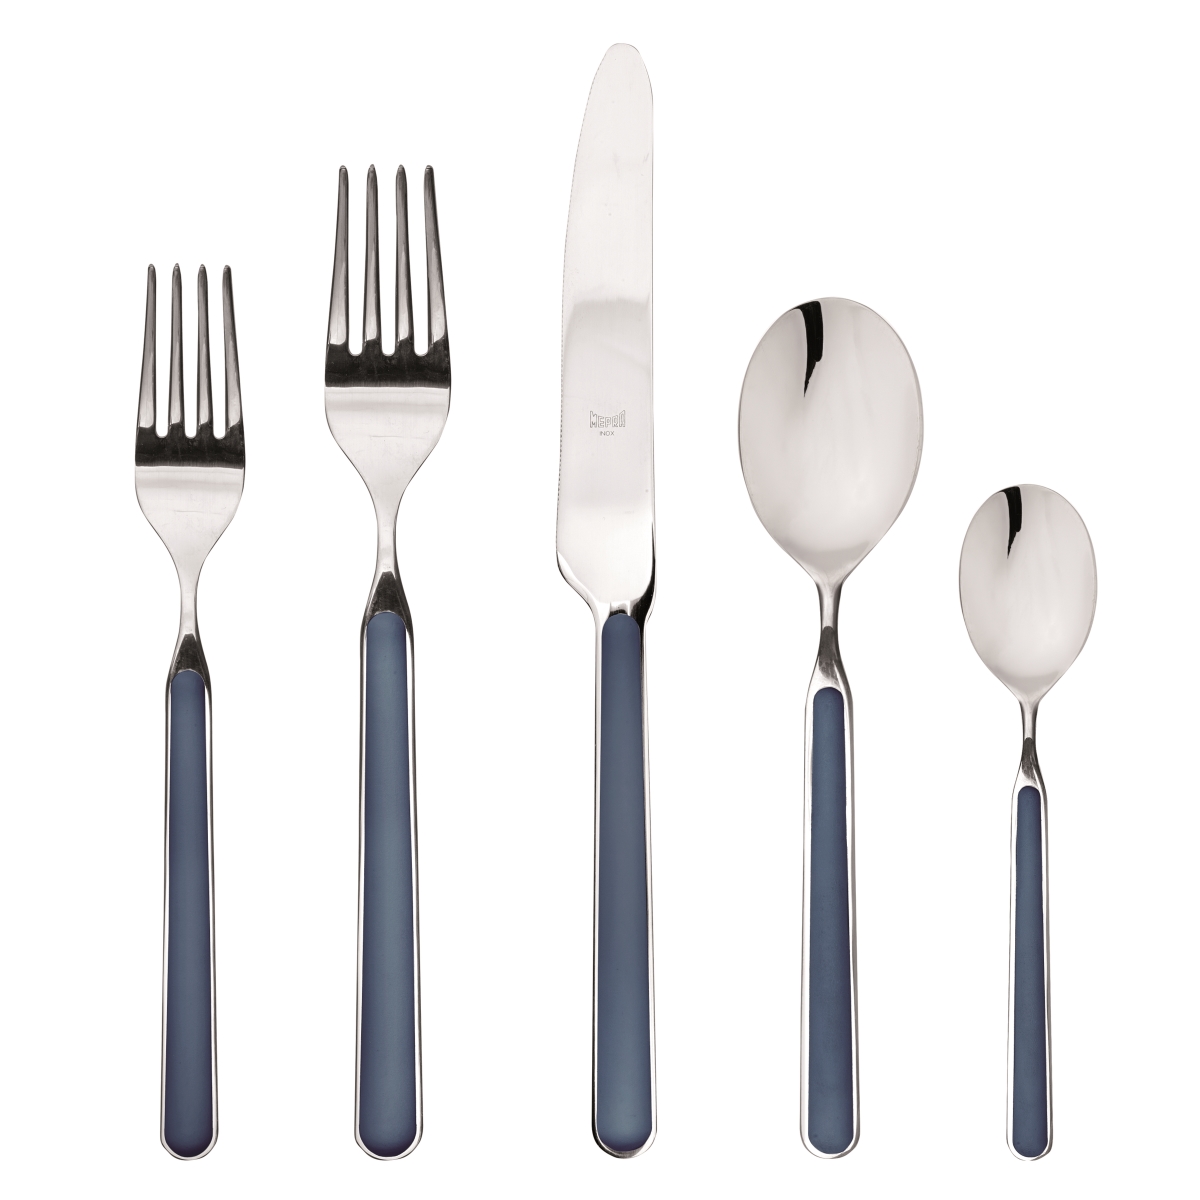 10b622005 Stainless Steel Fantasia Place Set, Blue - 5 Piece